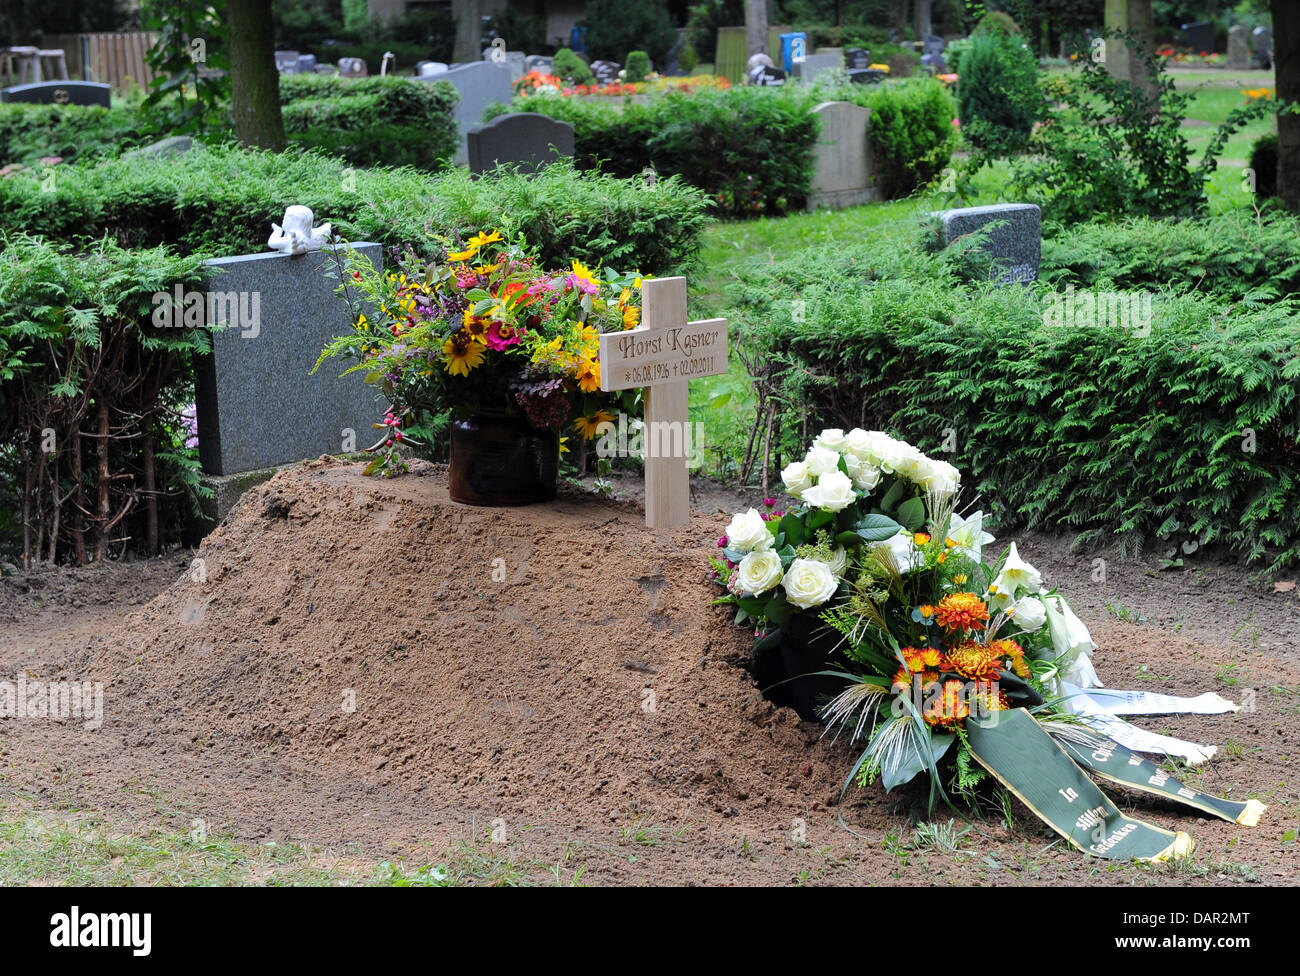 The grave of Horst Kasner, father of German Chancellor Angela Merkel, is seen at Waldfriedhof cemetery in Templin, Germany, 10 September 2011. Kasner died on 02 September 2011 aged 85 years. Photo: JENS KALAENE Stock Photo